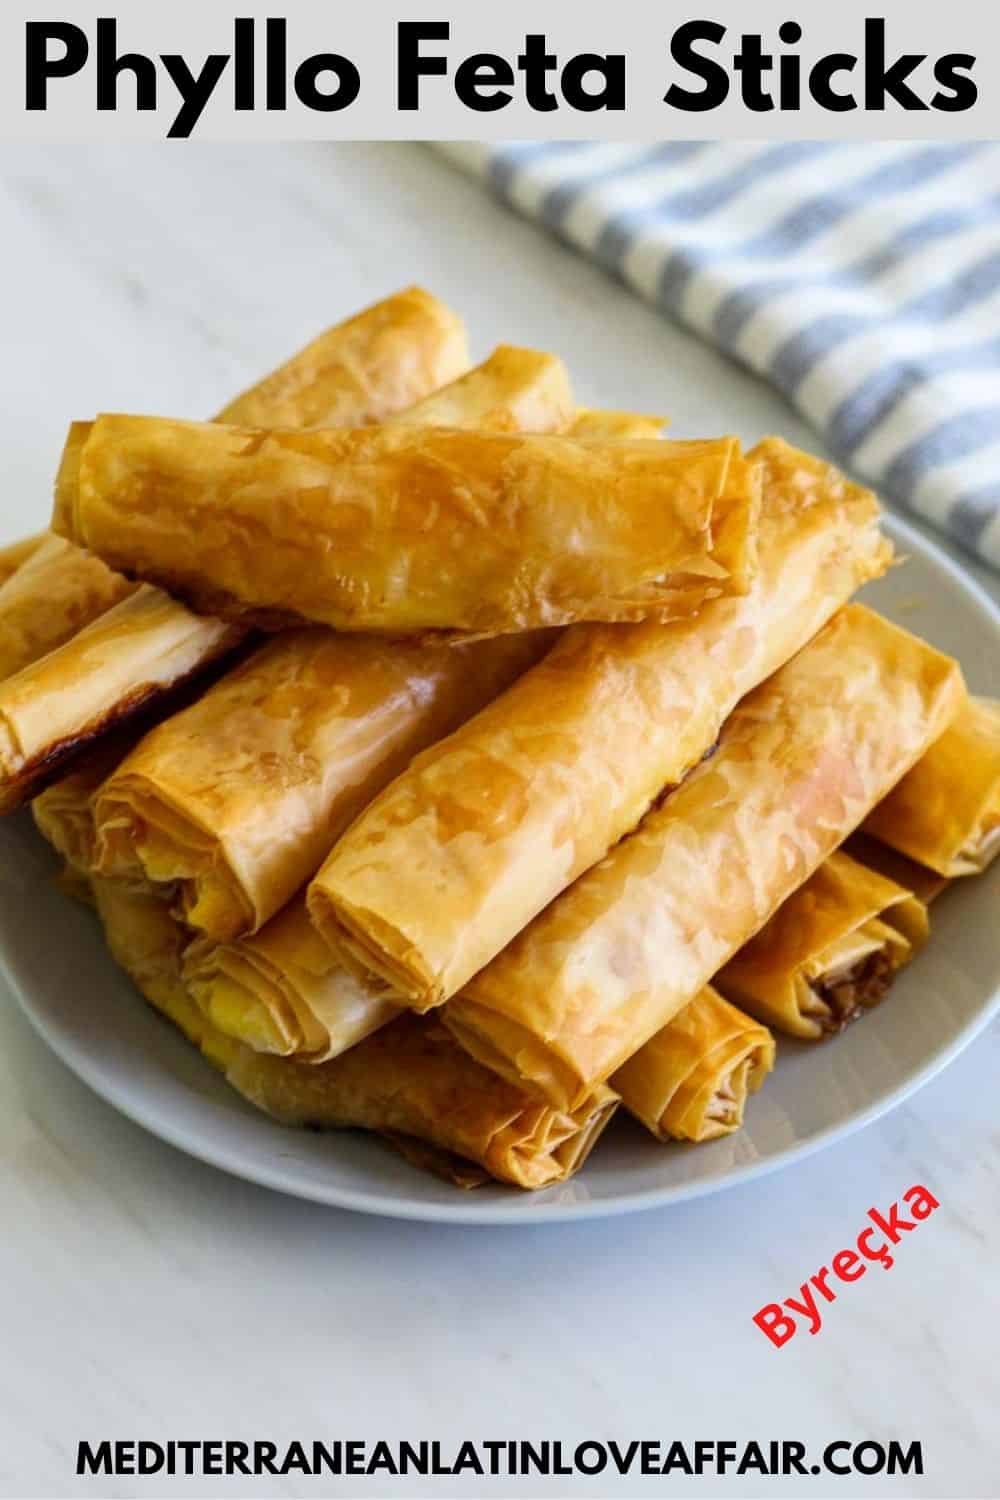 An image prepared for Pinterest. It shows the phyllo feta sticks on a serving platter piled up on top of each other. Then there's a title bar on top of the image and the website link in the bottom. #byrek #borek #burek #mediterraneanlatinloveaffair